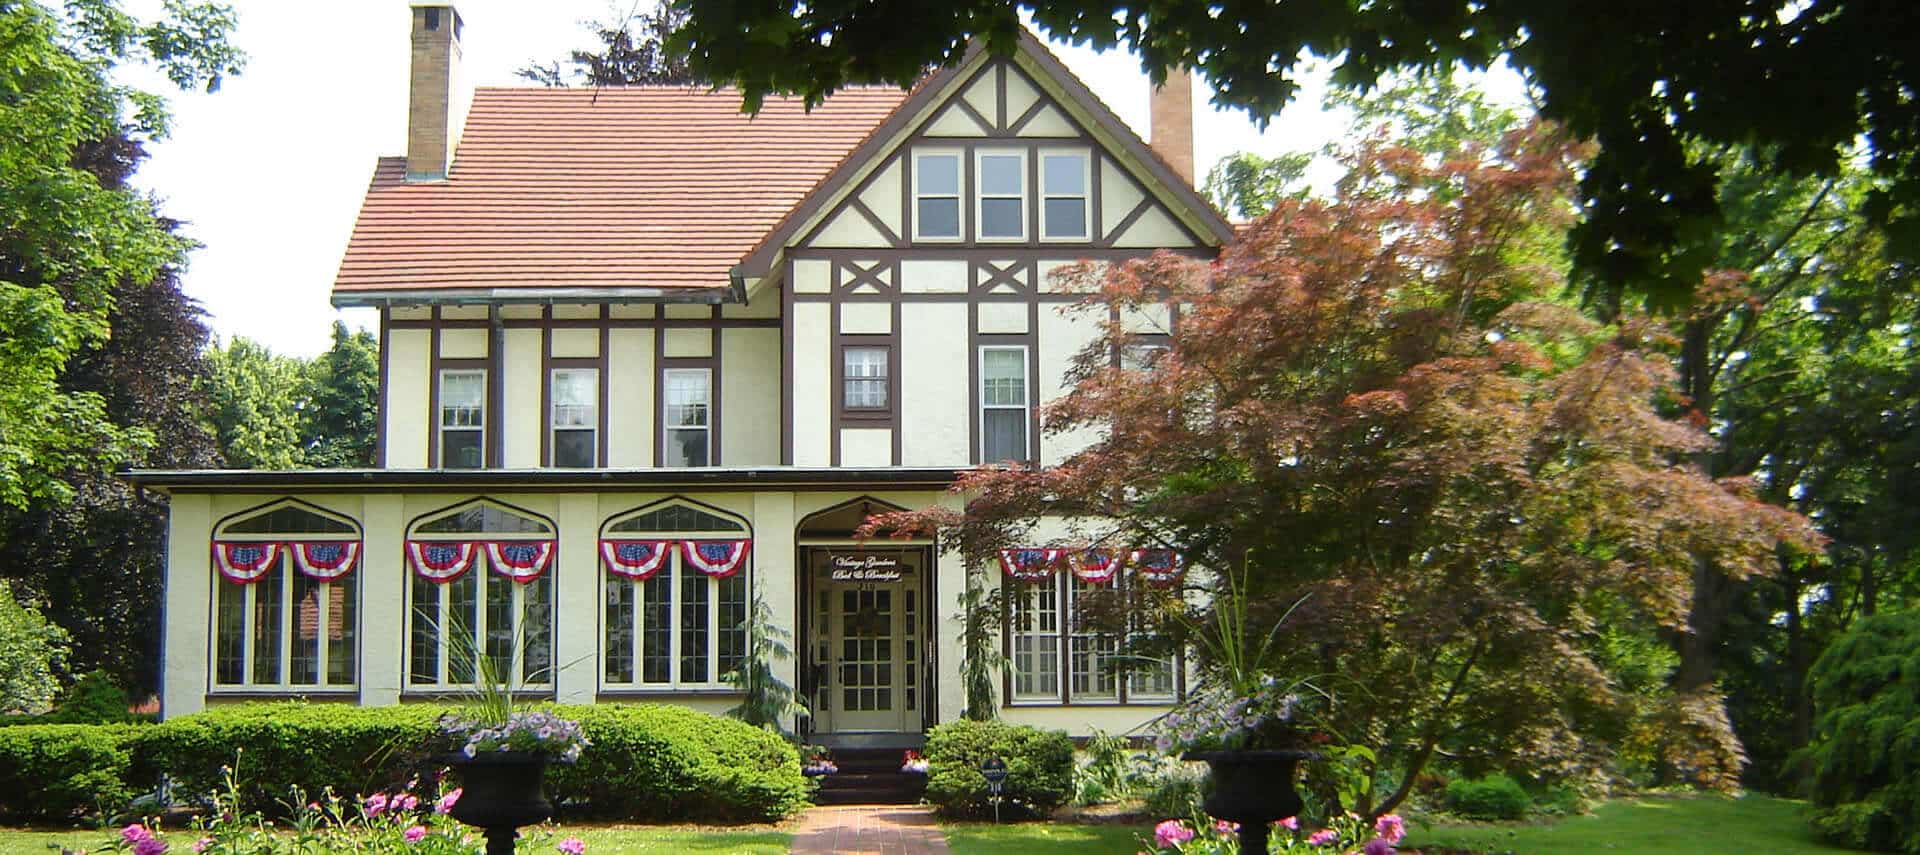 Historic two-story Tudor home on a green lawn surrounded by green trees.